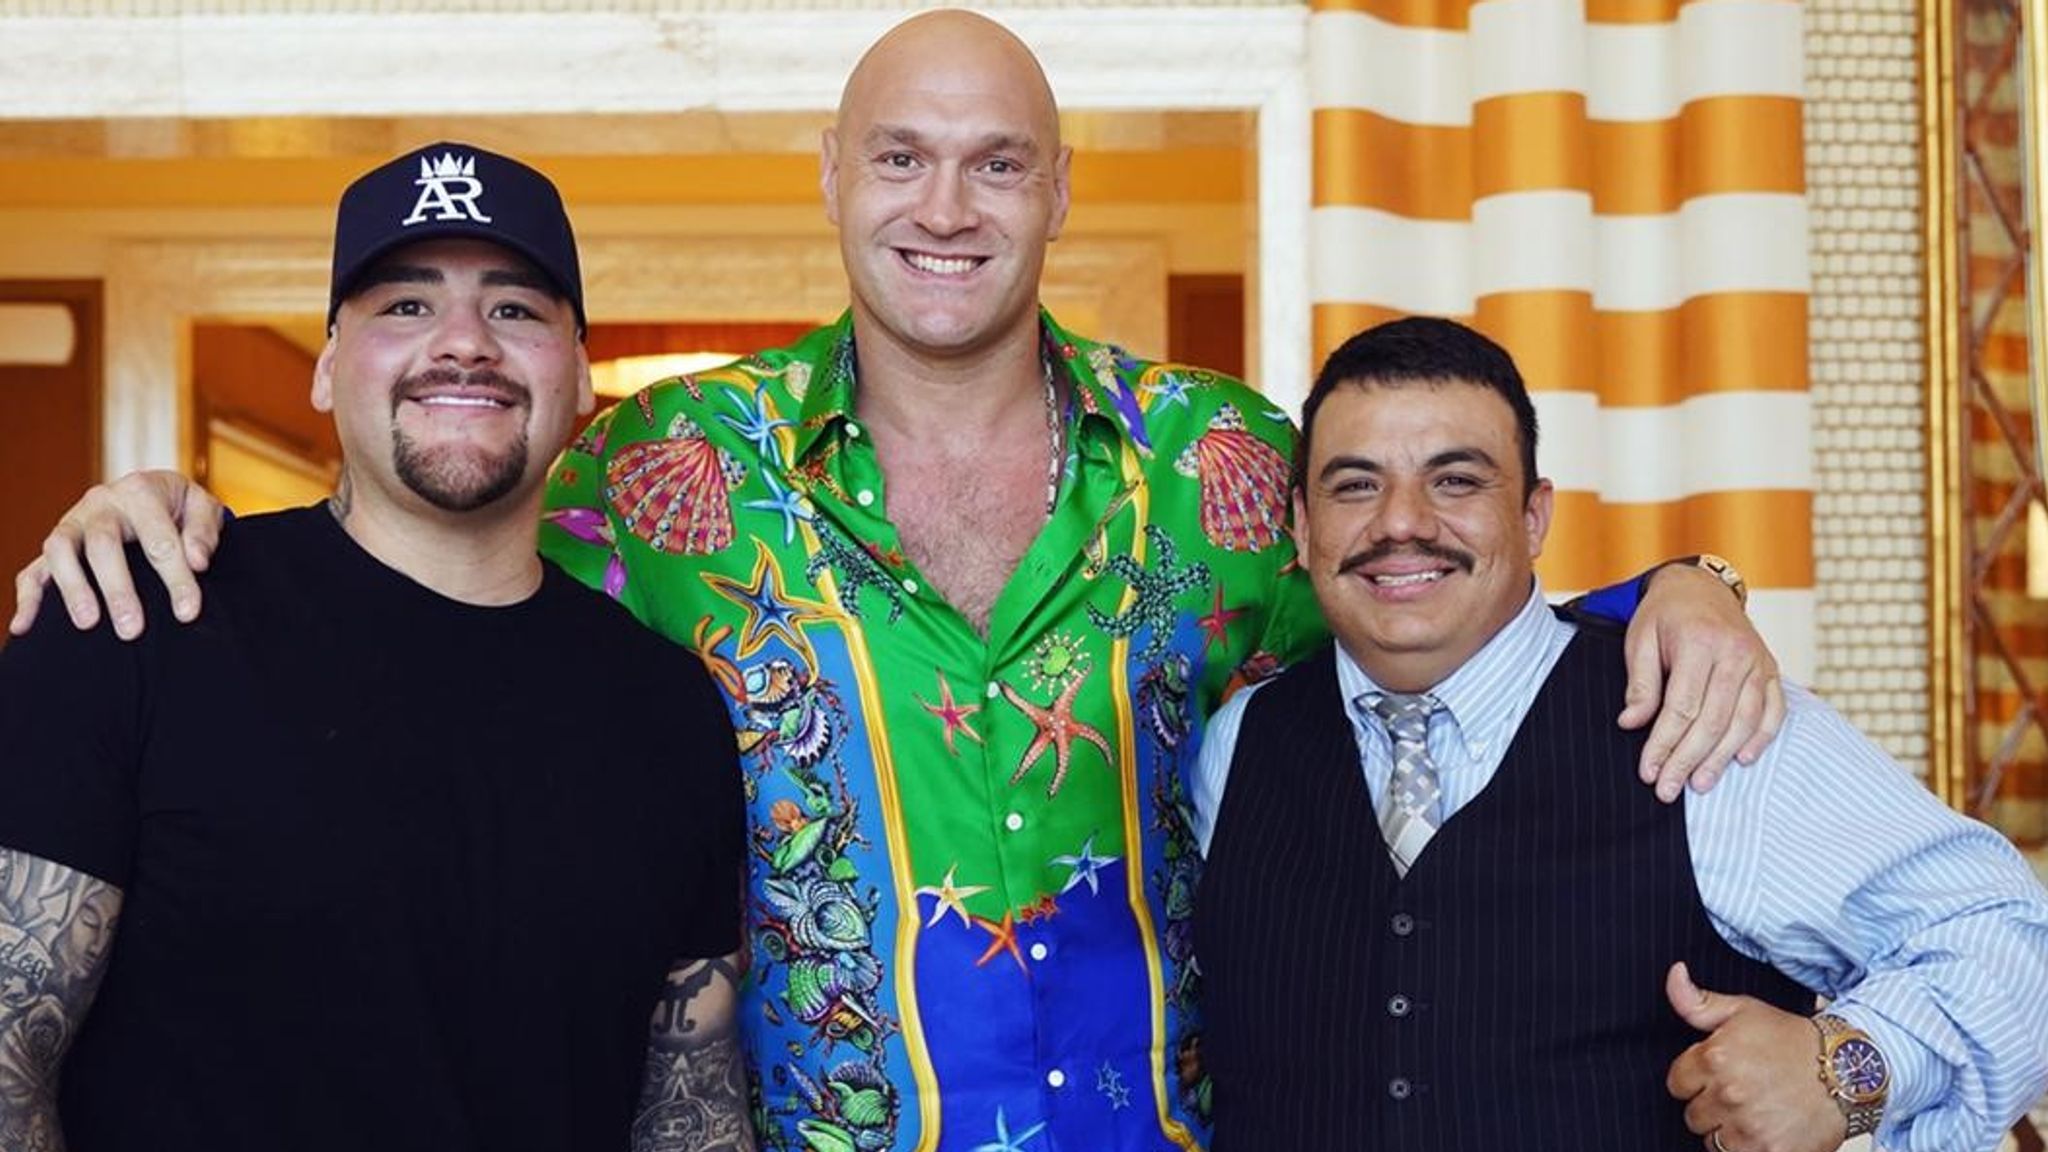 Tyson Furys meeting with Andy Ruiz Jr revealed Faith, life, family, their struggles and Anthony Joshua discussed Boxing News Sky Sports